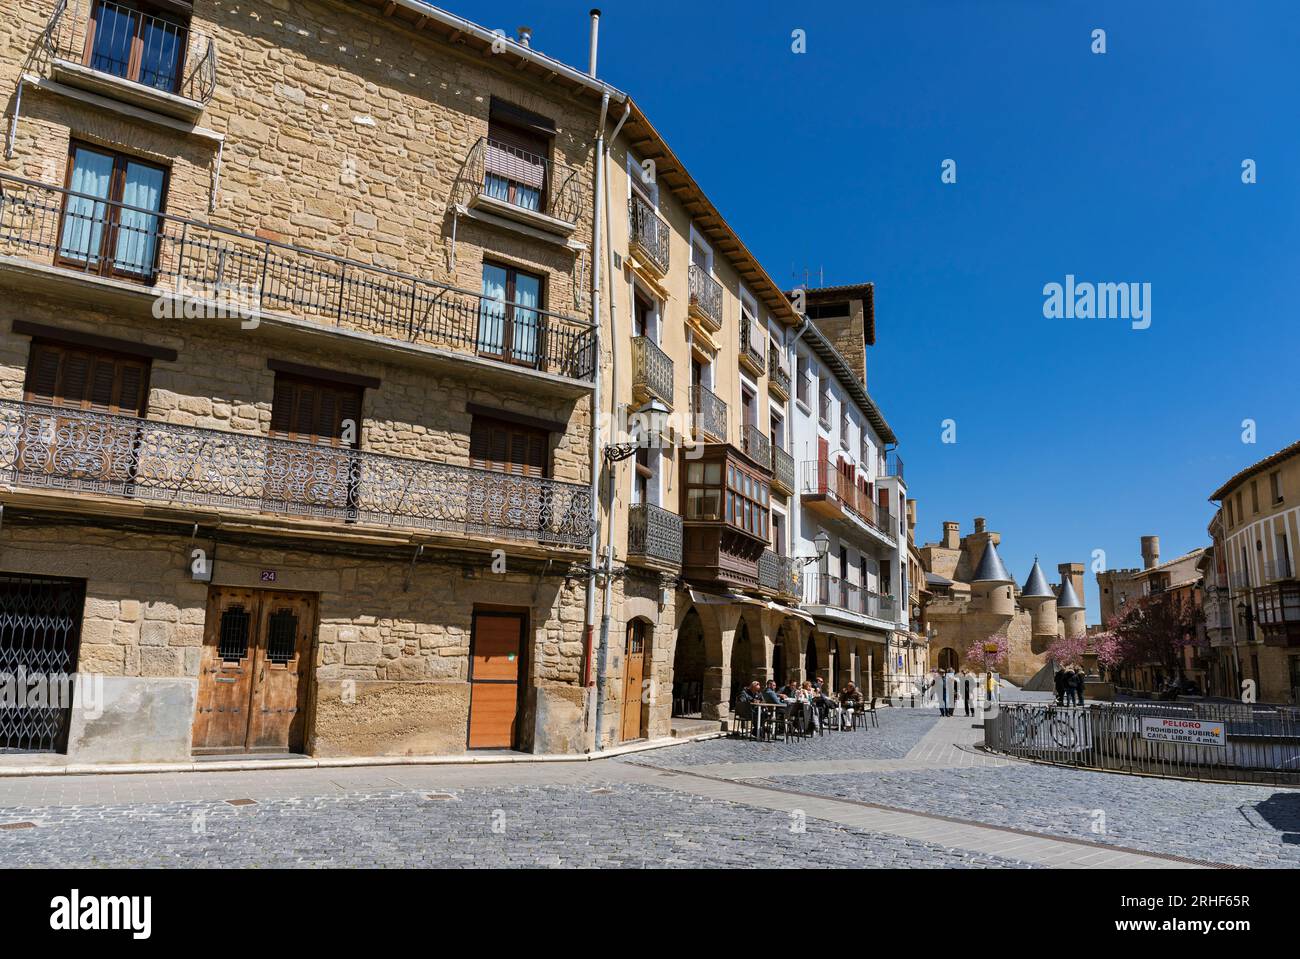 Europe, Spain, Navarre, Olite, Traditional Buildings and Houses on Plaza Carlos III El Noble Stock Photo